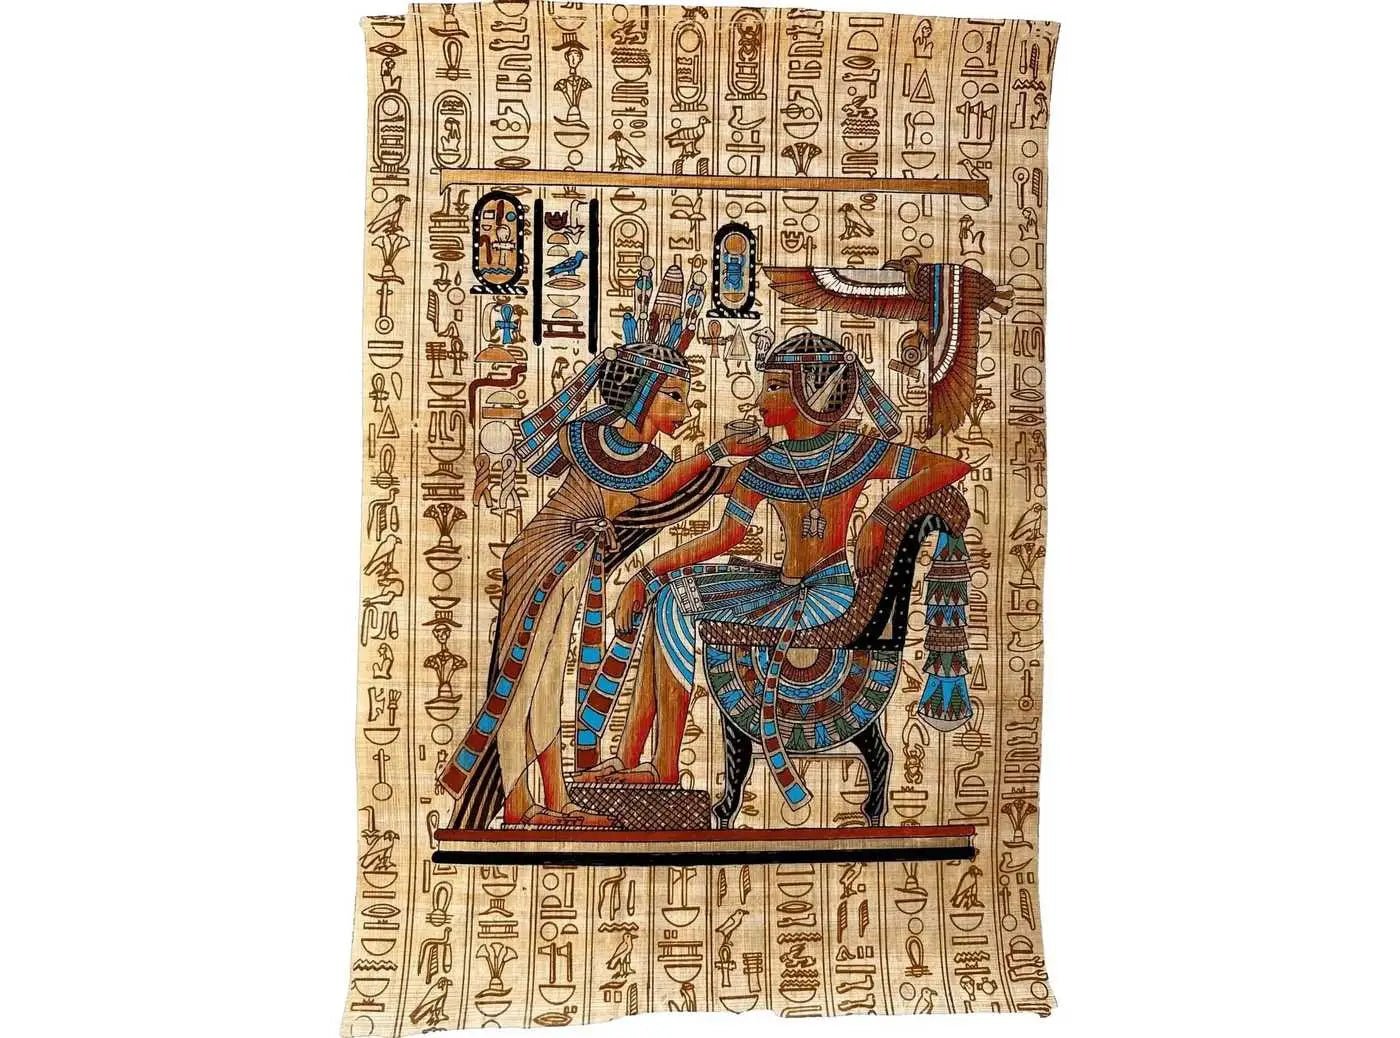 egyptian king and queen art